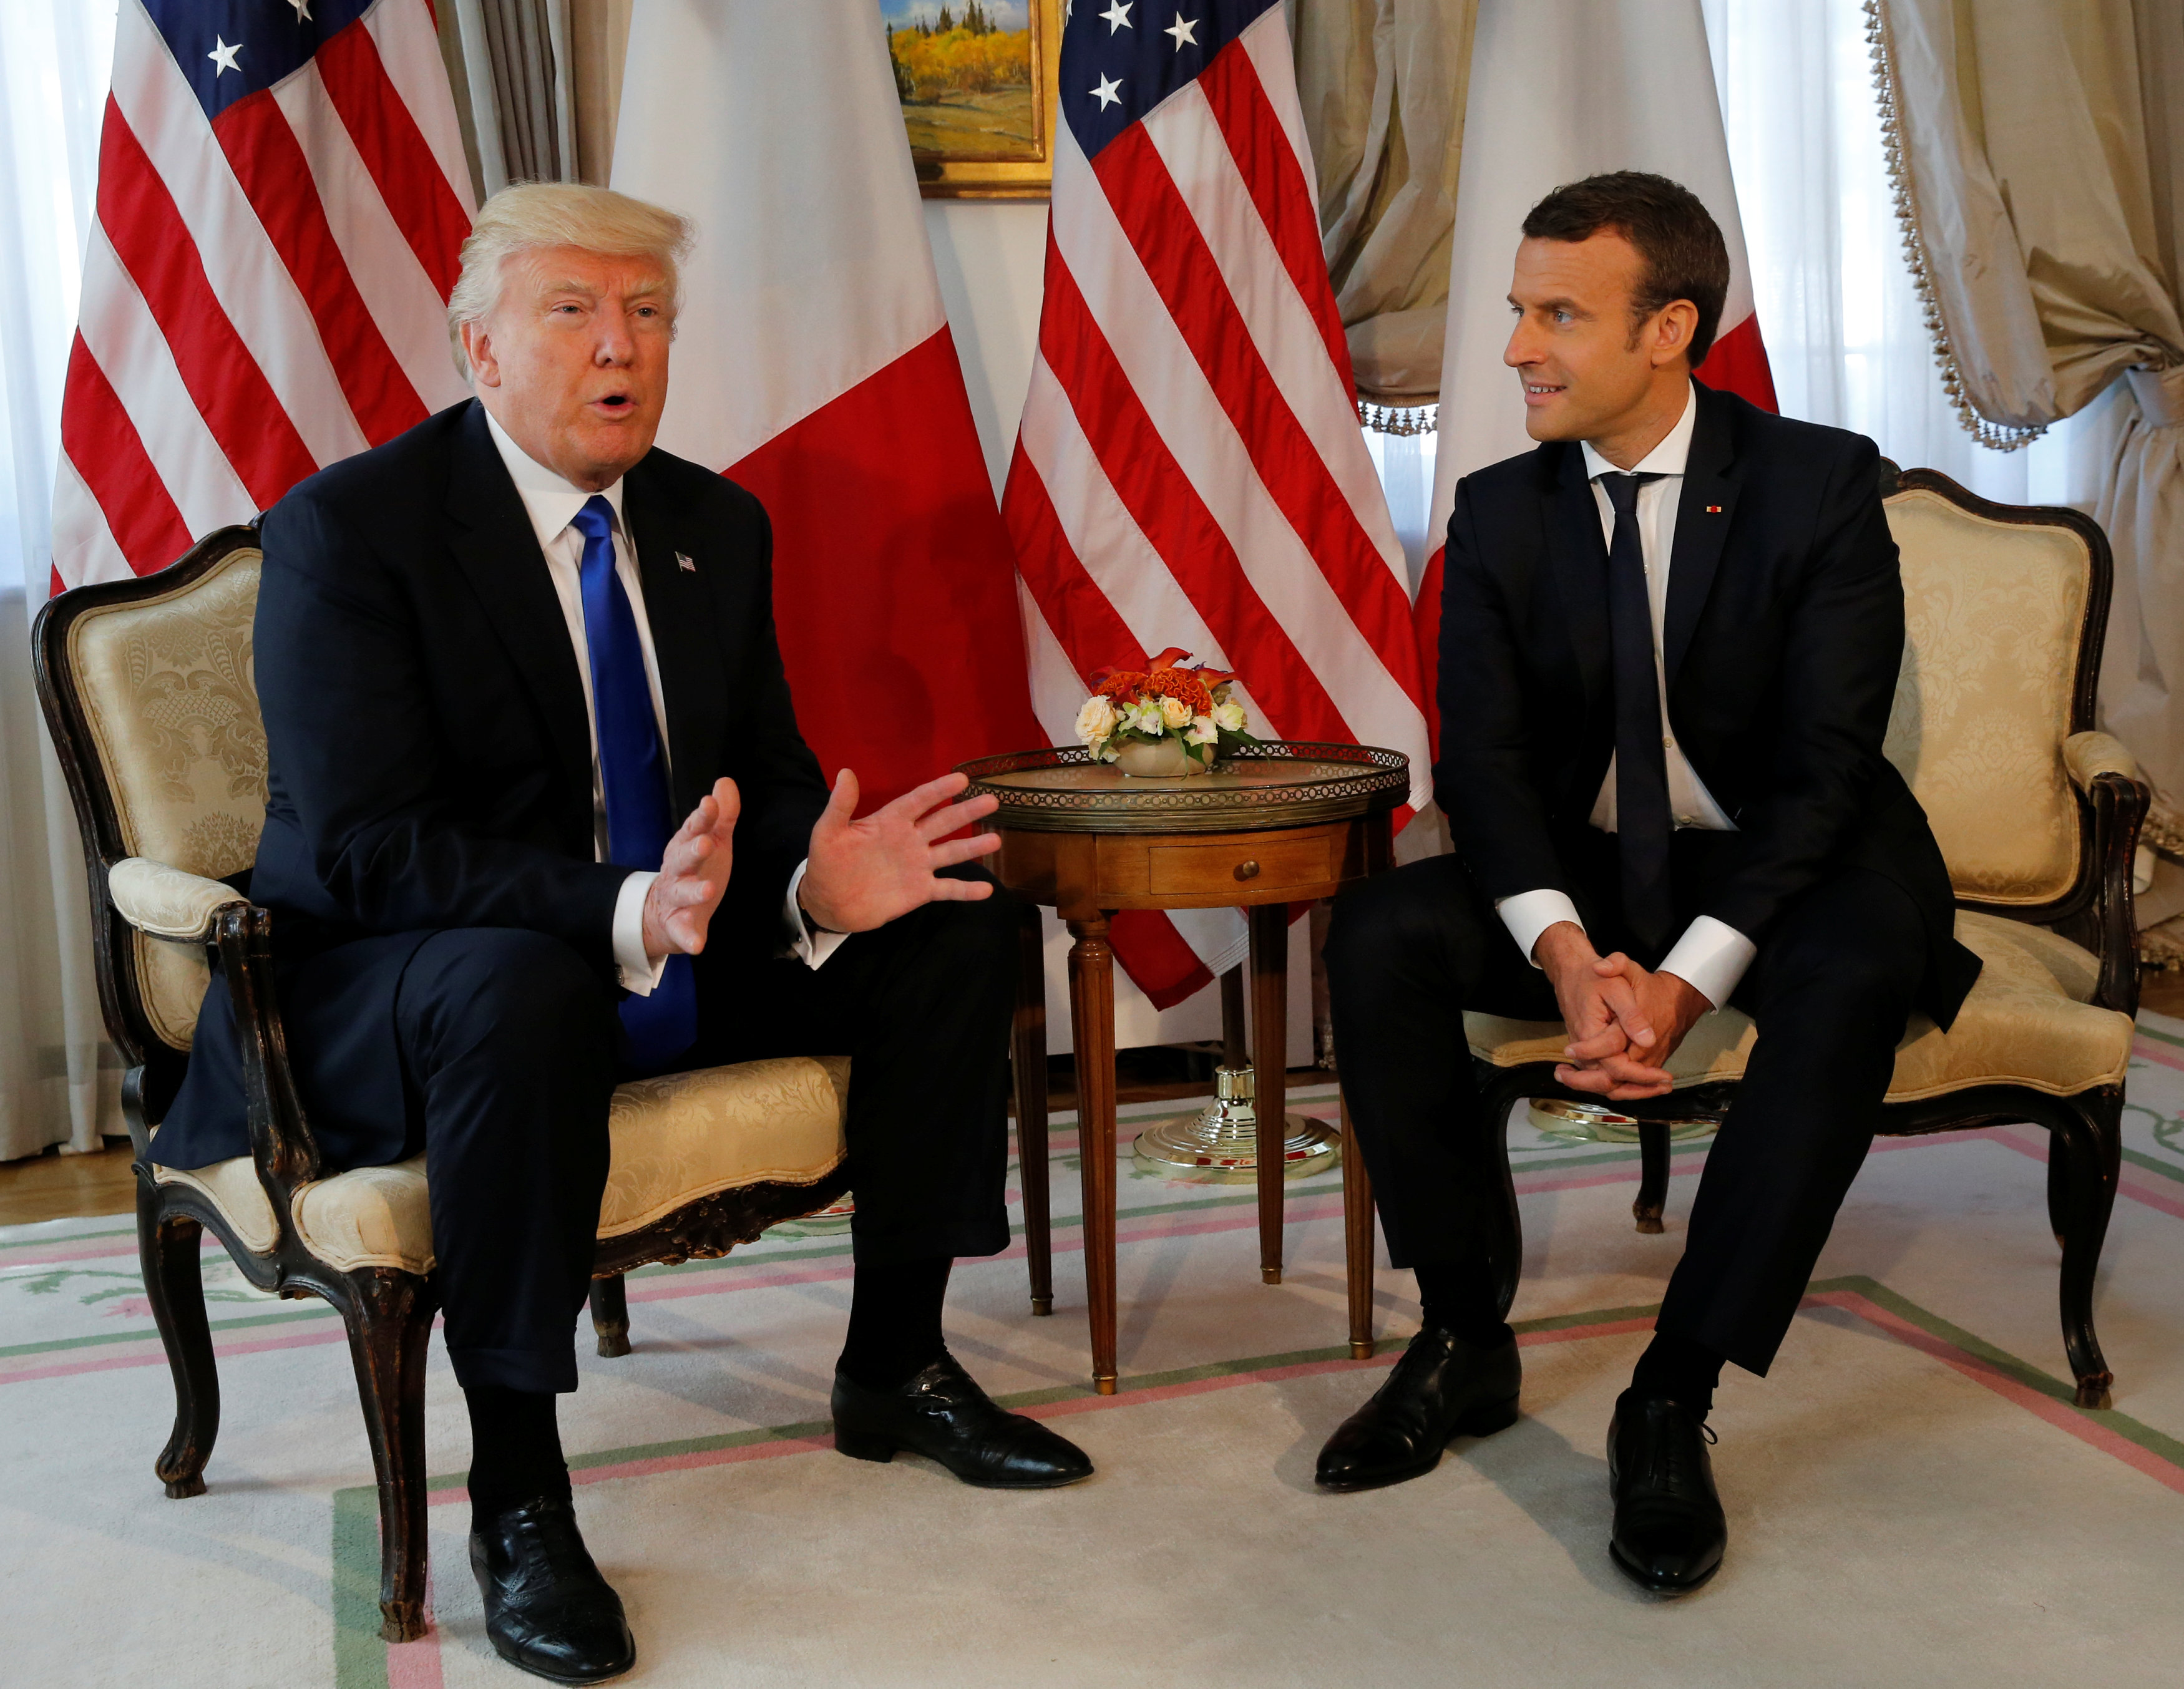 U.S. President Donald Trump (L) gestures beside French President Emmanuel Macron during their meeting before a lunch ahead of a NATO Summit in Brussels, Belgium, May 25, 2017. REUTERS/REUTERS/Jonathan Ernst